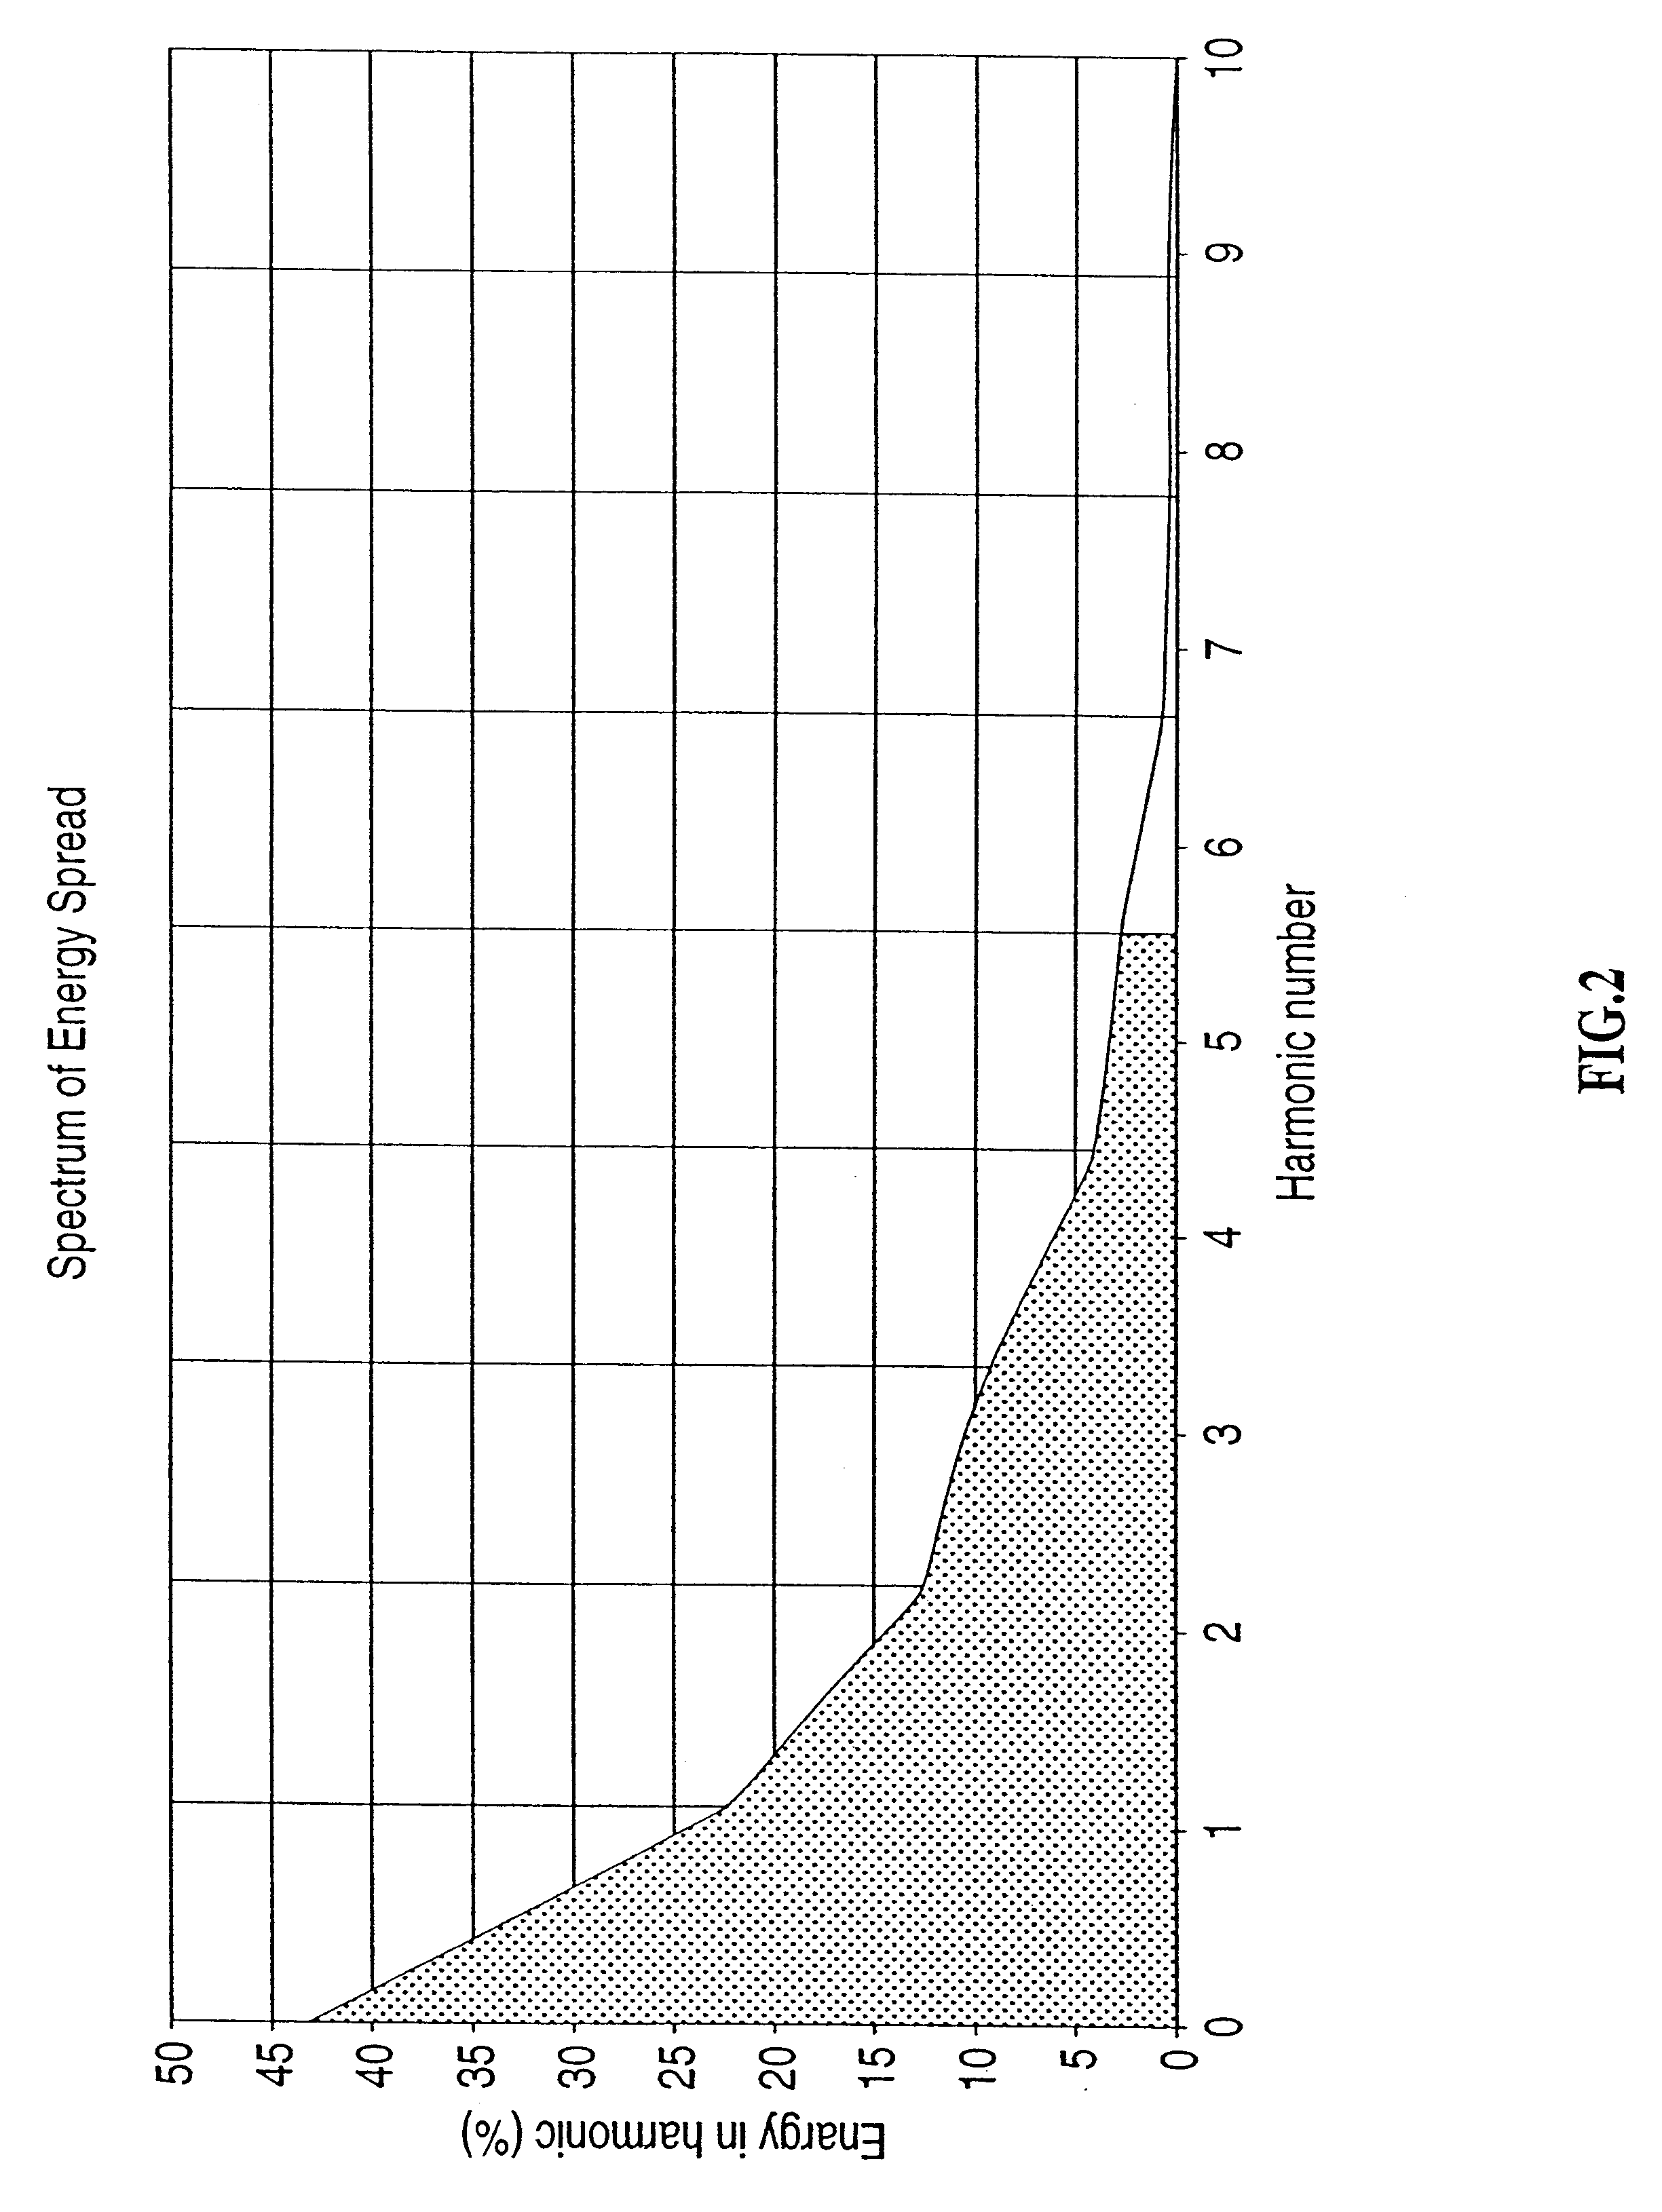 System and method for non-invasively monitoring hemodynamic parameters